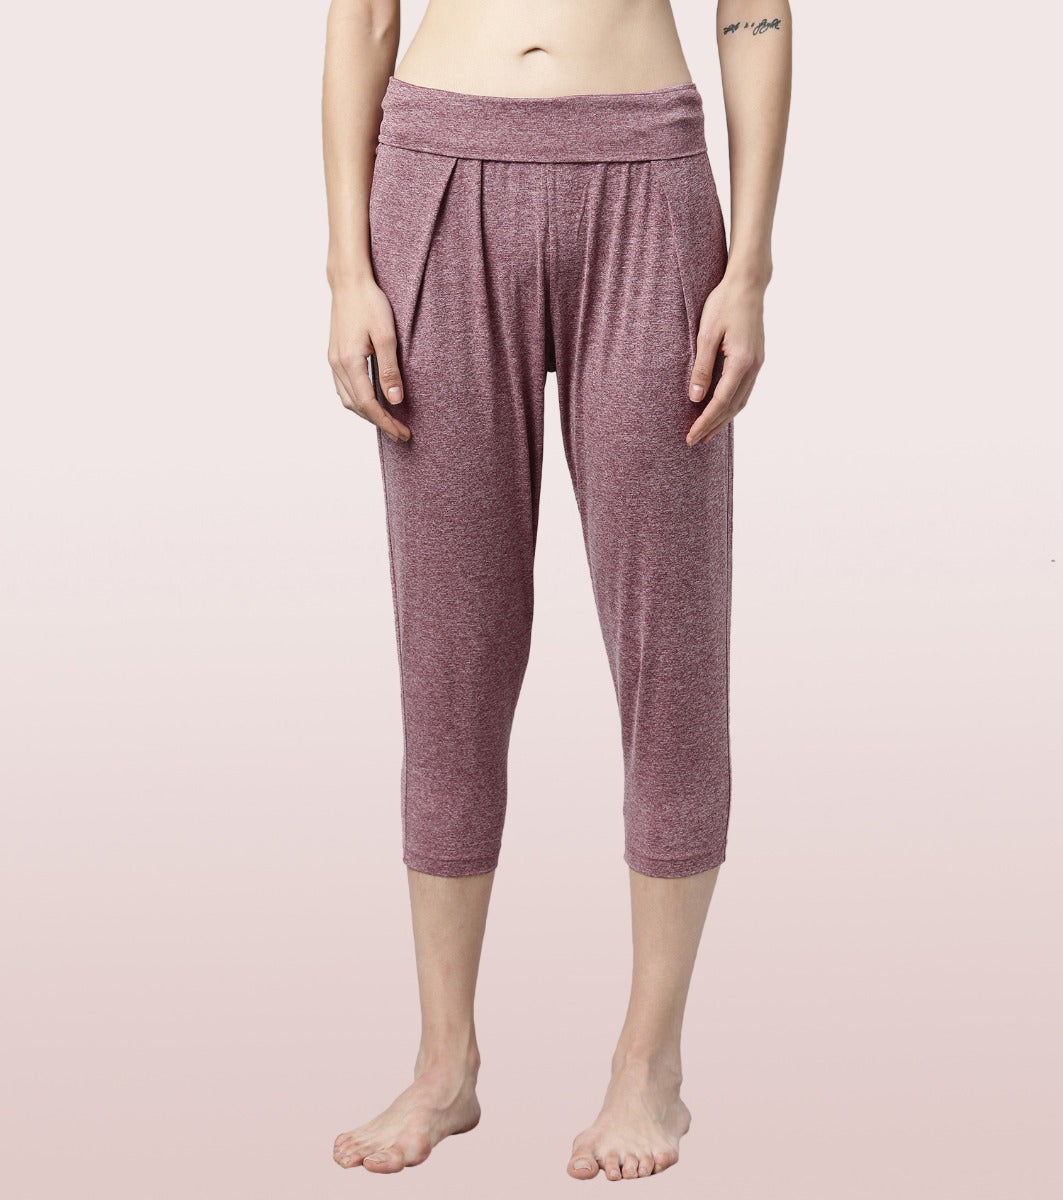 Yoga Pant | Dry Fit Pant With Foldover Waistband